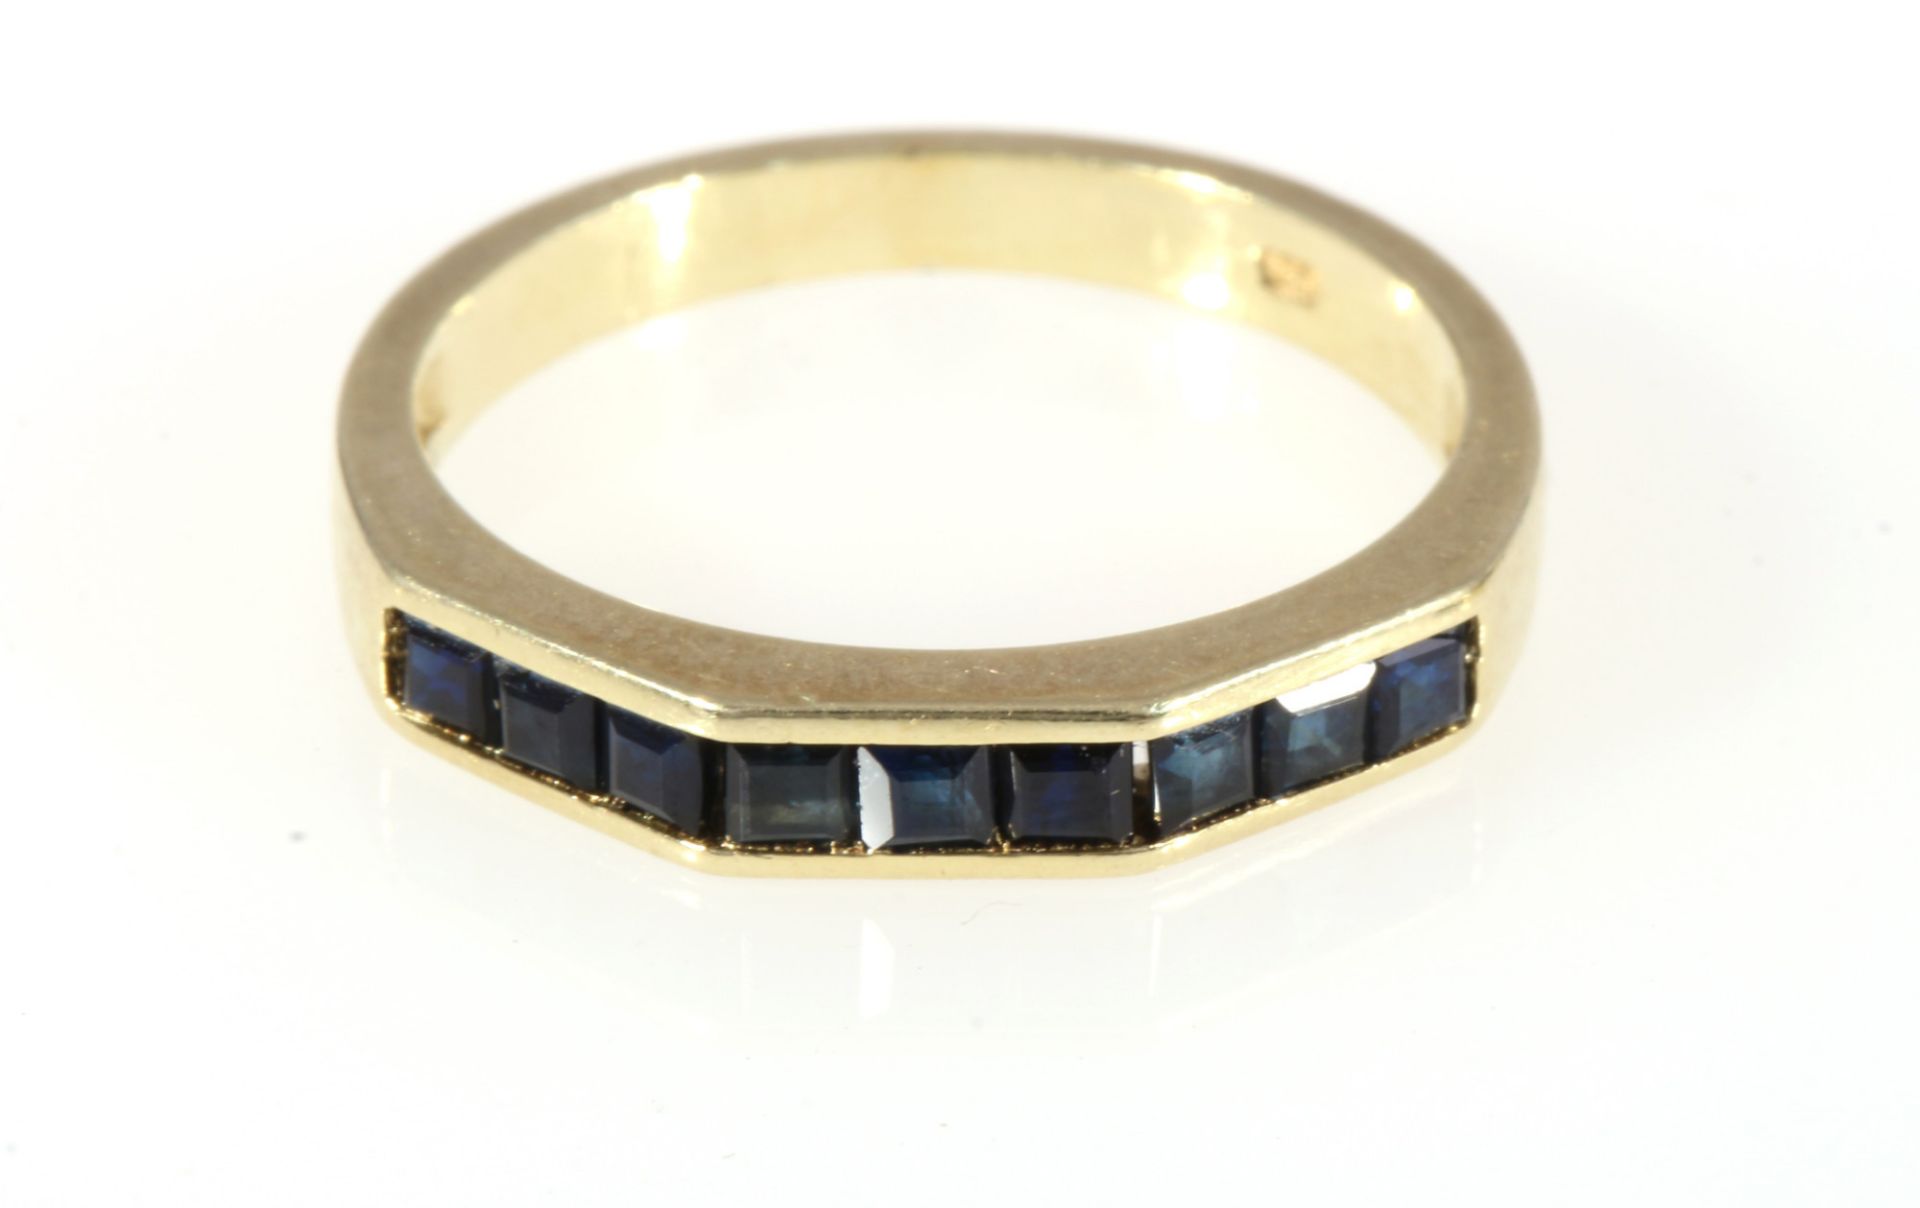 585 gold 2 rings with sapphires, 14K Gold 2 Ringe mit Saphiren, - Image 3 of 5